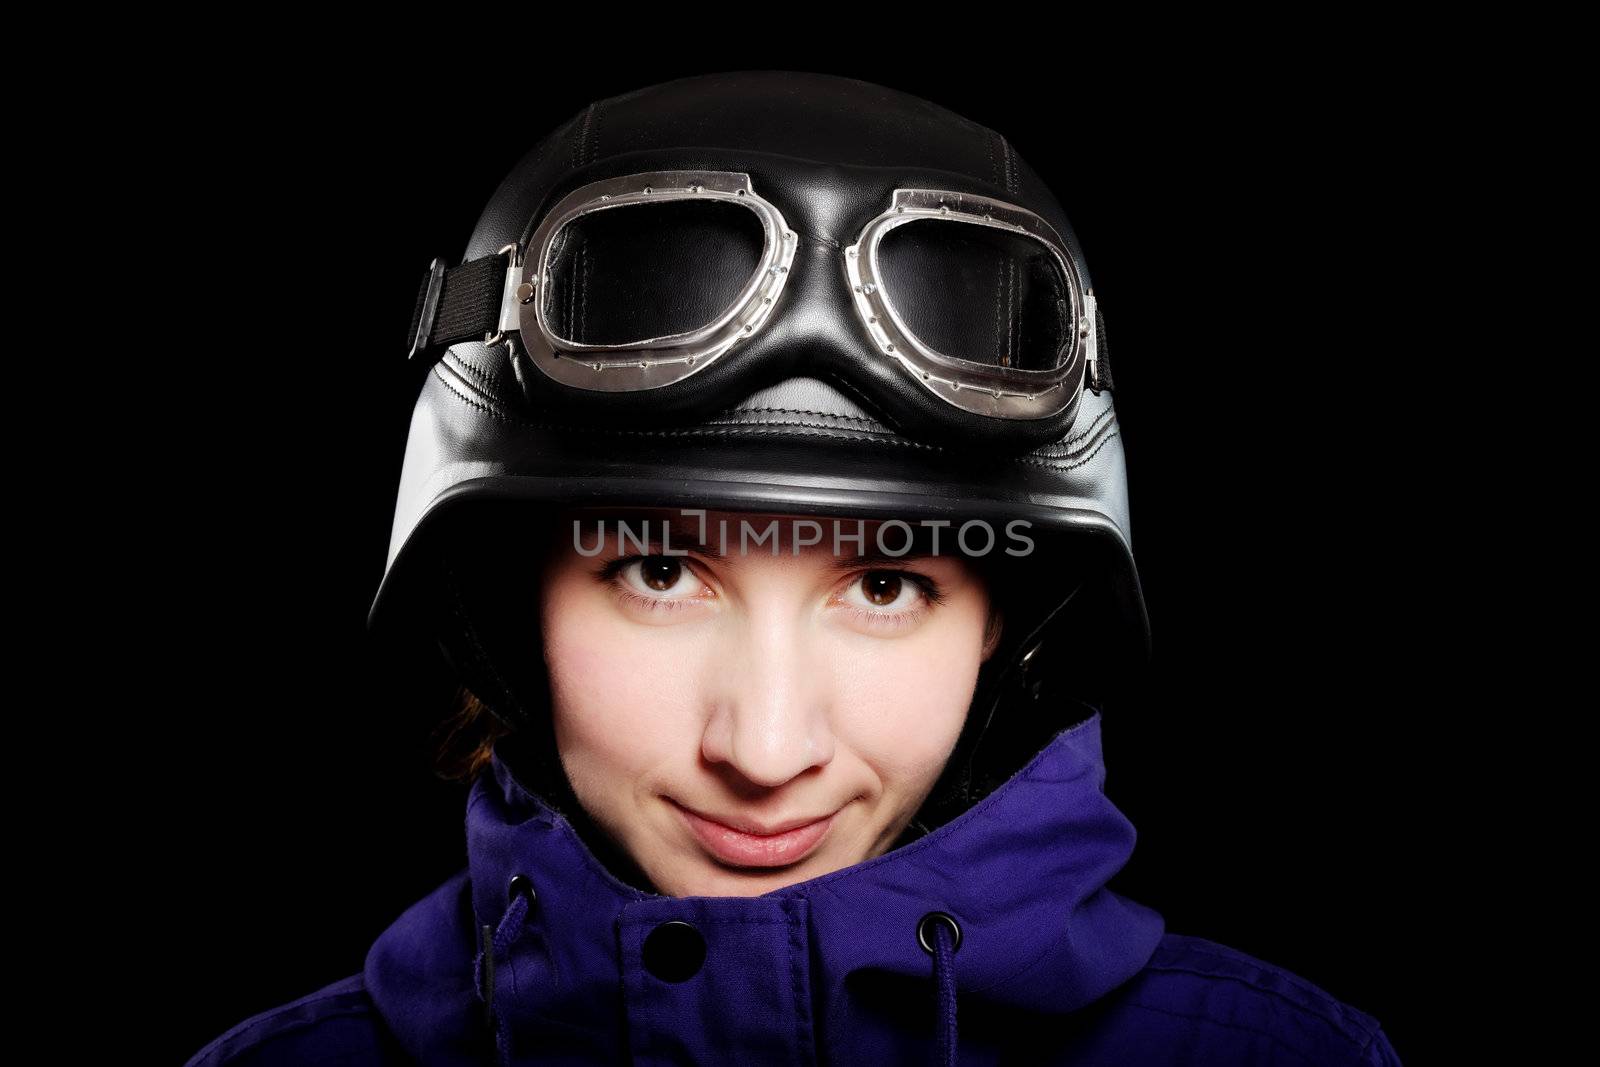 girl with us-army style helmet and goggles, on black